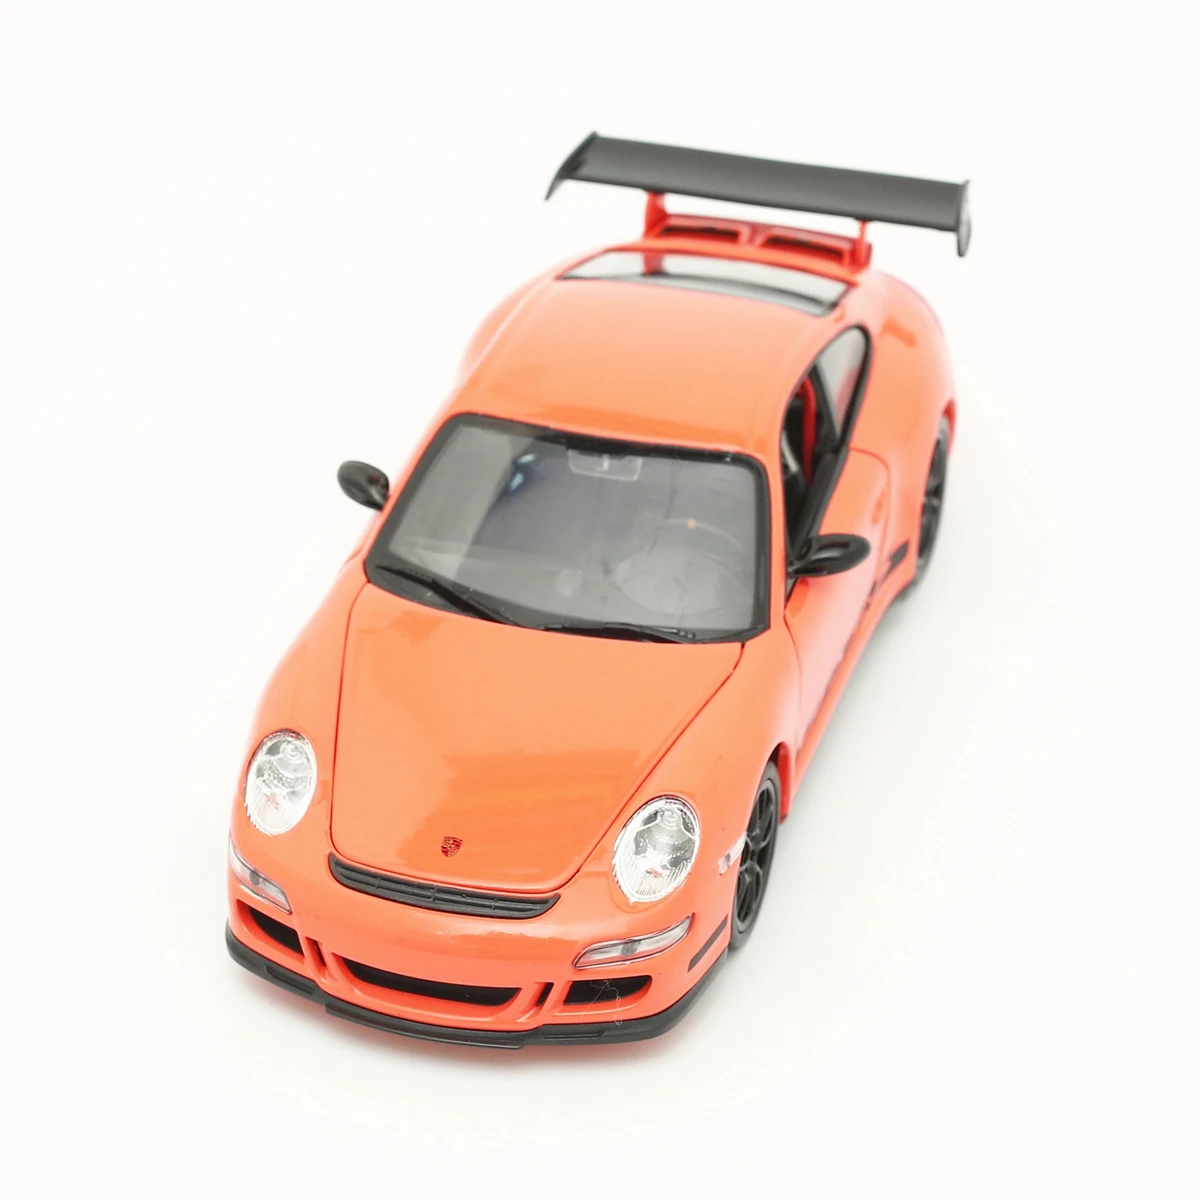 

WELLY 1:24 Porsche 911 GT3 RS 997 Alloy Luxury Vehicle Diecast Pull Back Cars Model Toy Collection Xmas Gift